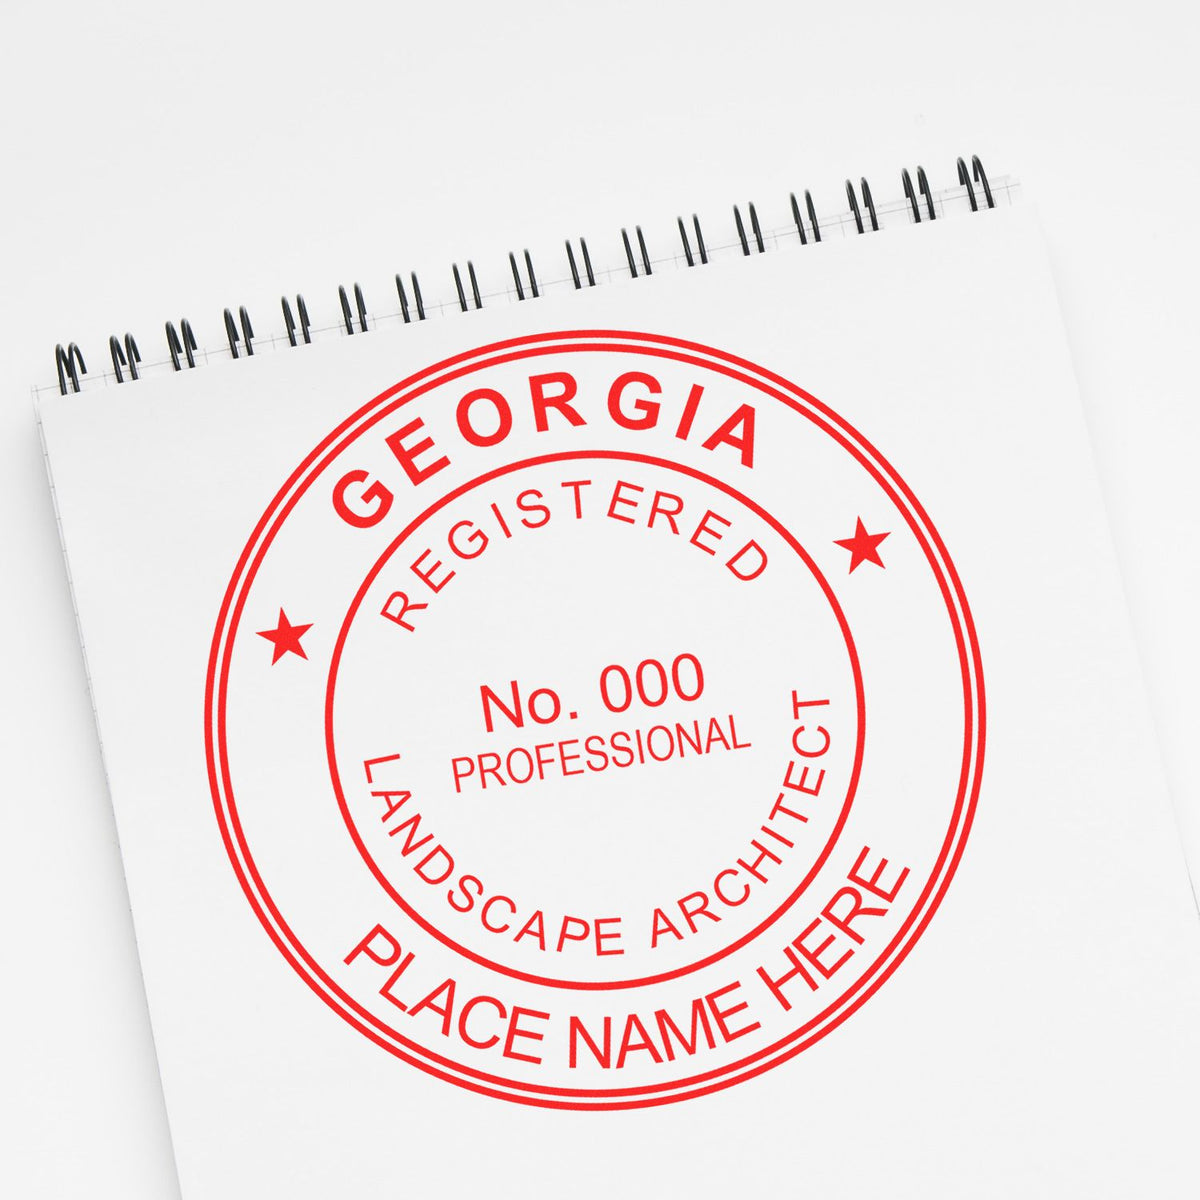 A stamped impression of the Self-Inking Georgia Landscape Architect Stamp in this stylish lifestyle photo, setting the tone for a unique and personalized product.